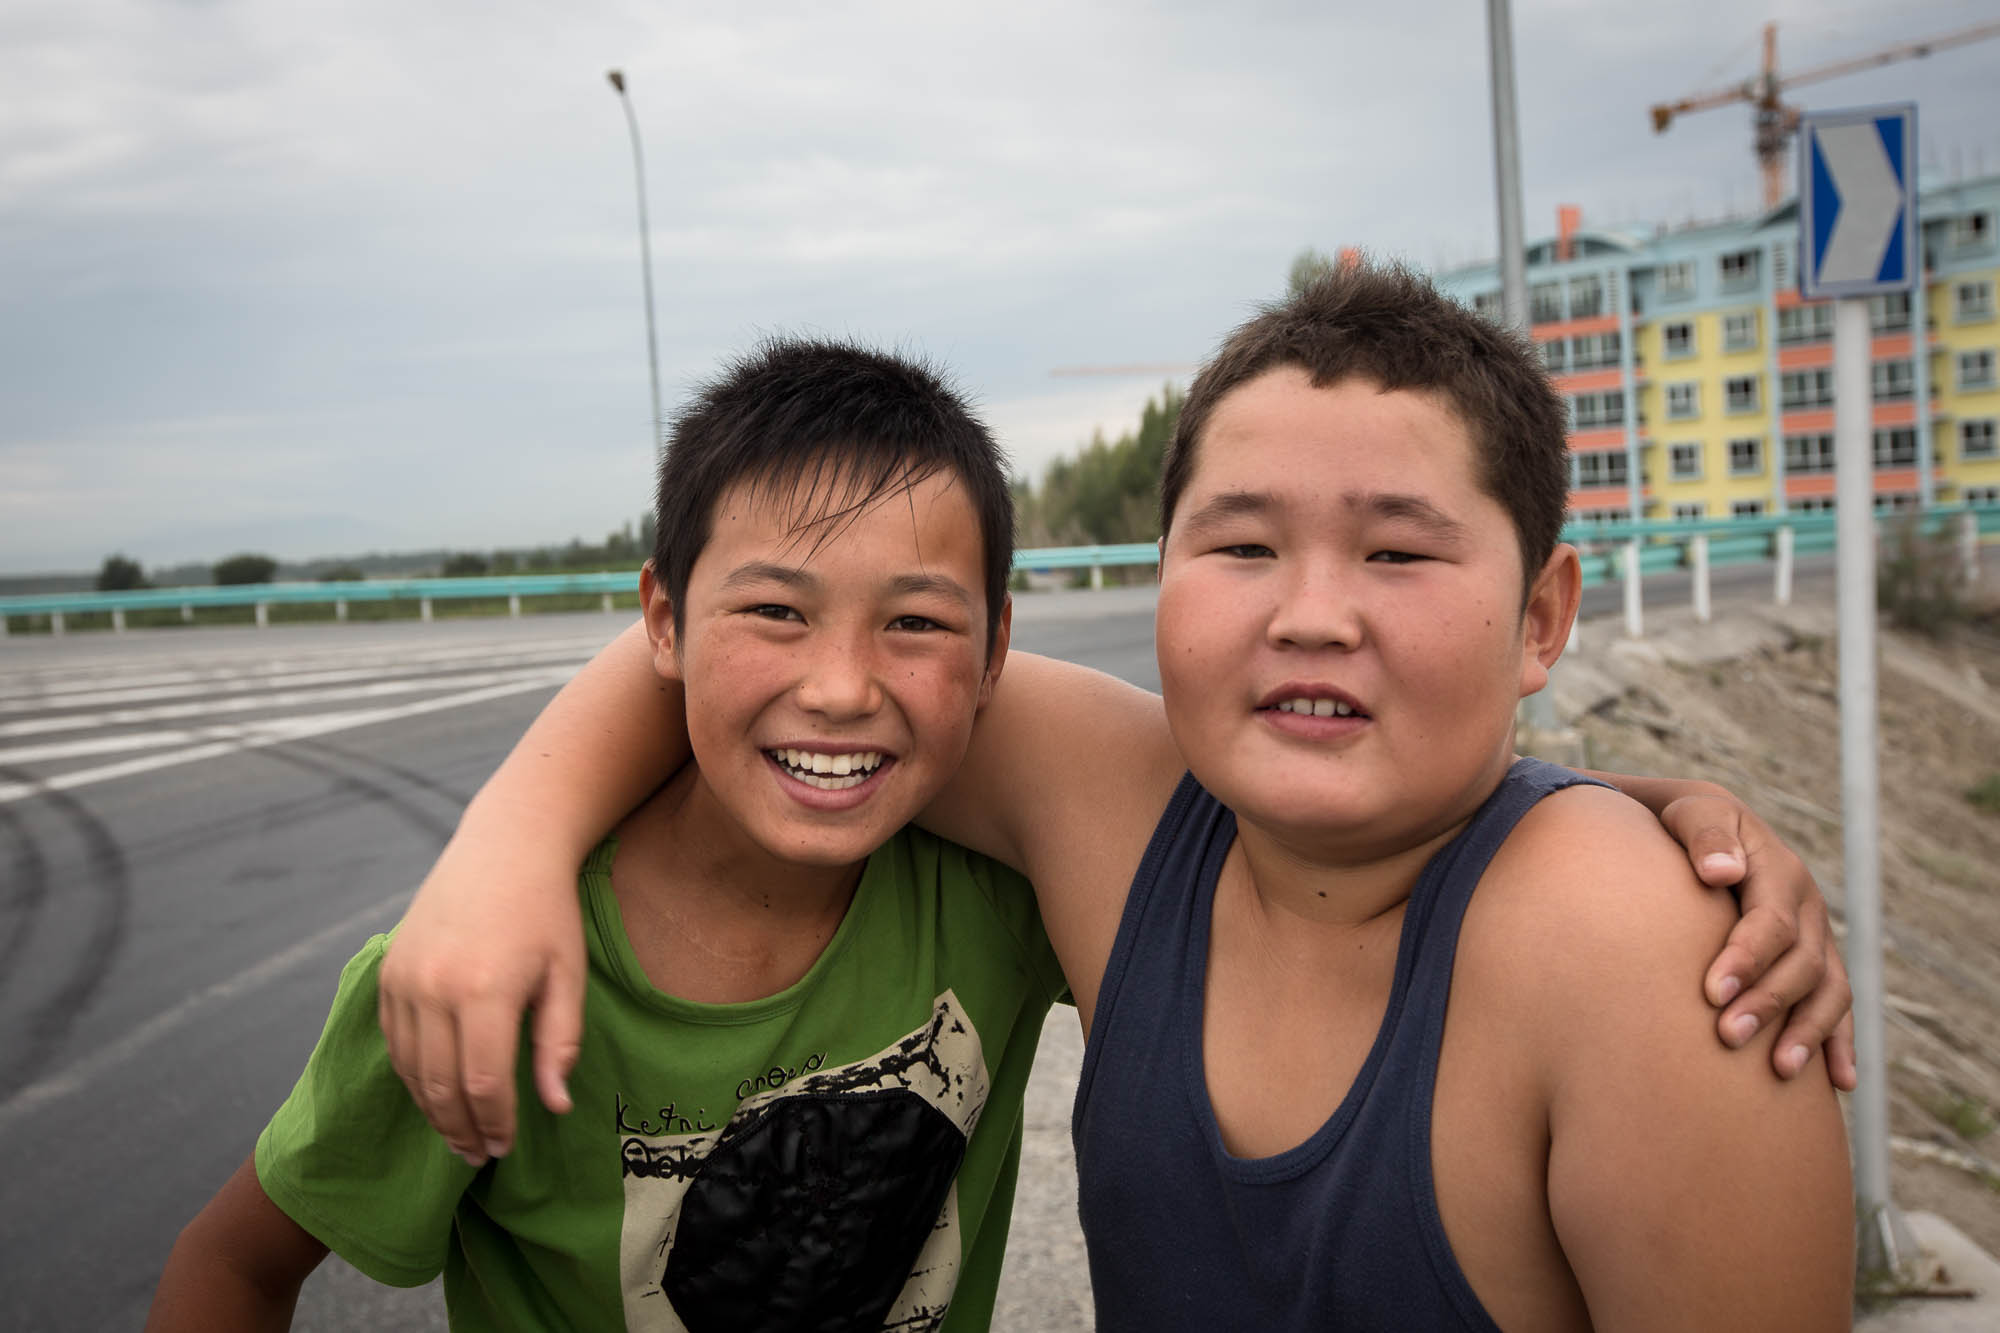 These two Kazakh kids delighted me with a friendly chat